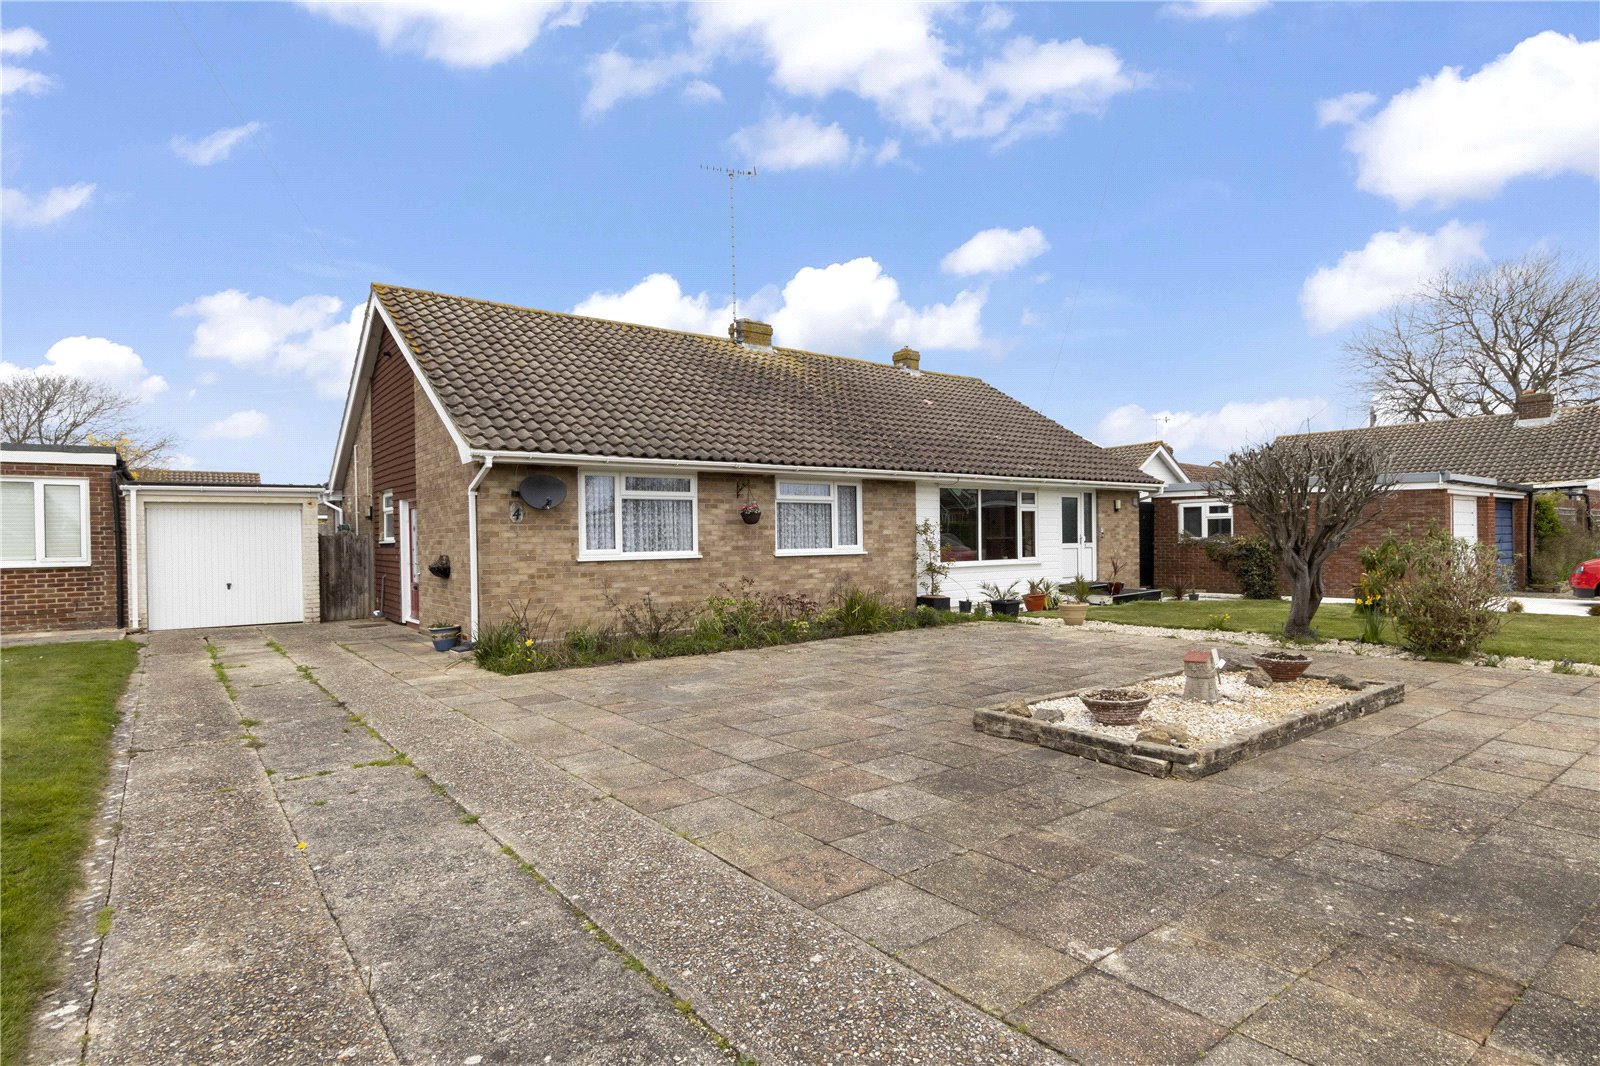 2 bed bungalow for sale in Nuffield Close, Bognor Regis - Property Image 1